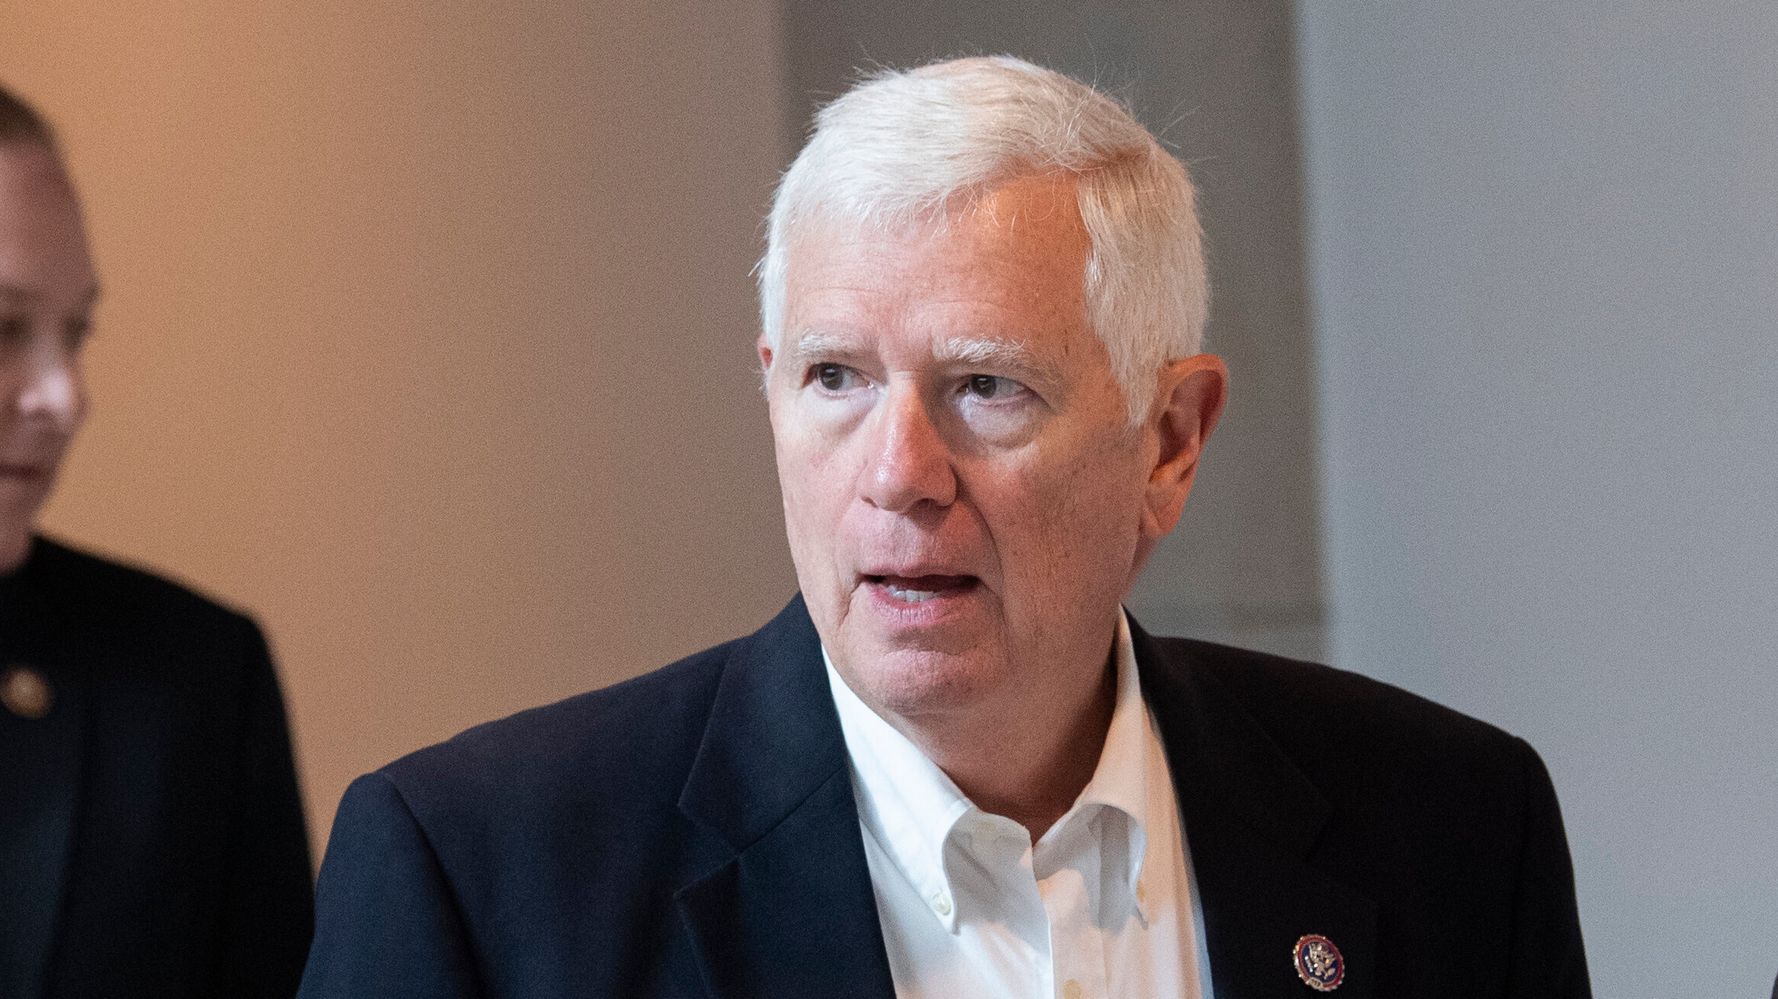 Rep. Mo Brooks Responds To Lawsuit By Accidentally Sharing Email Password